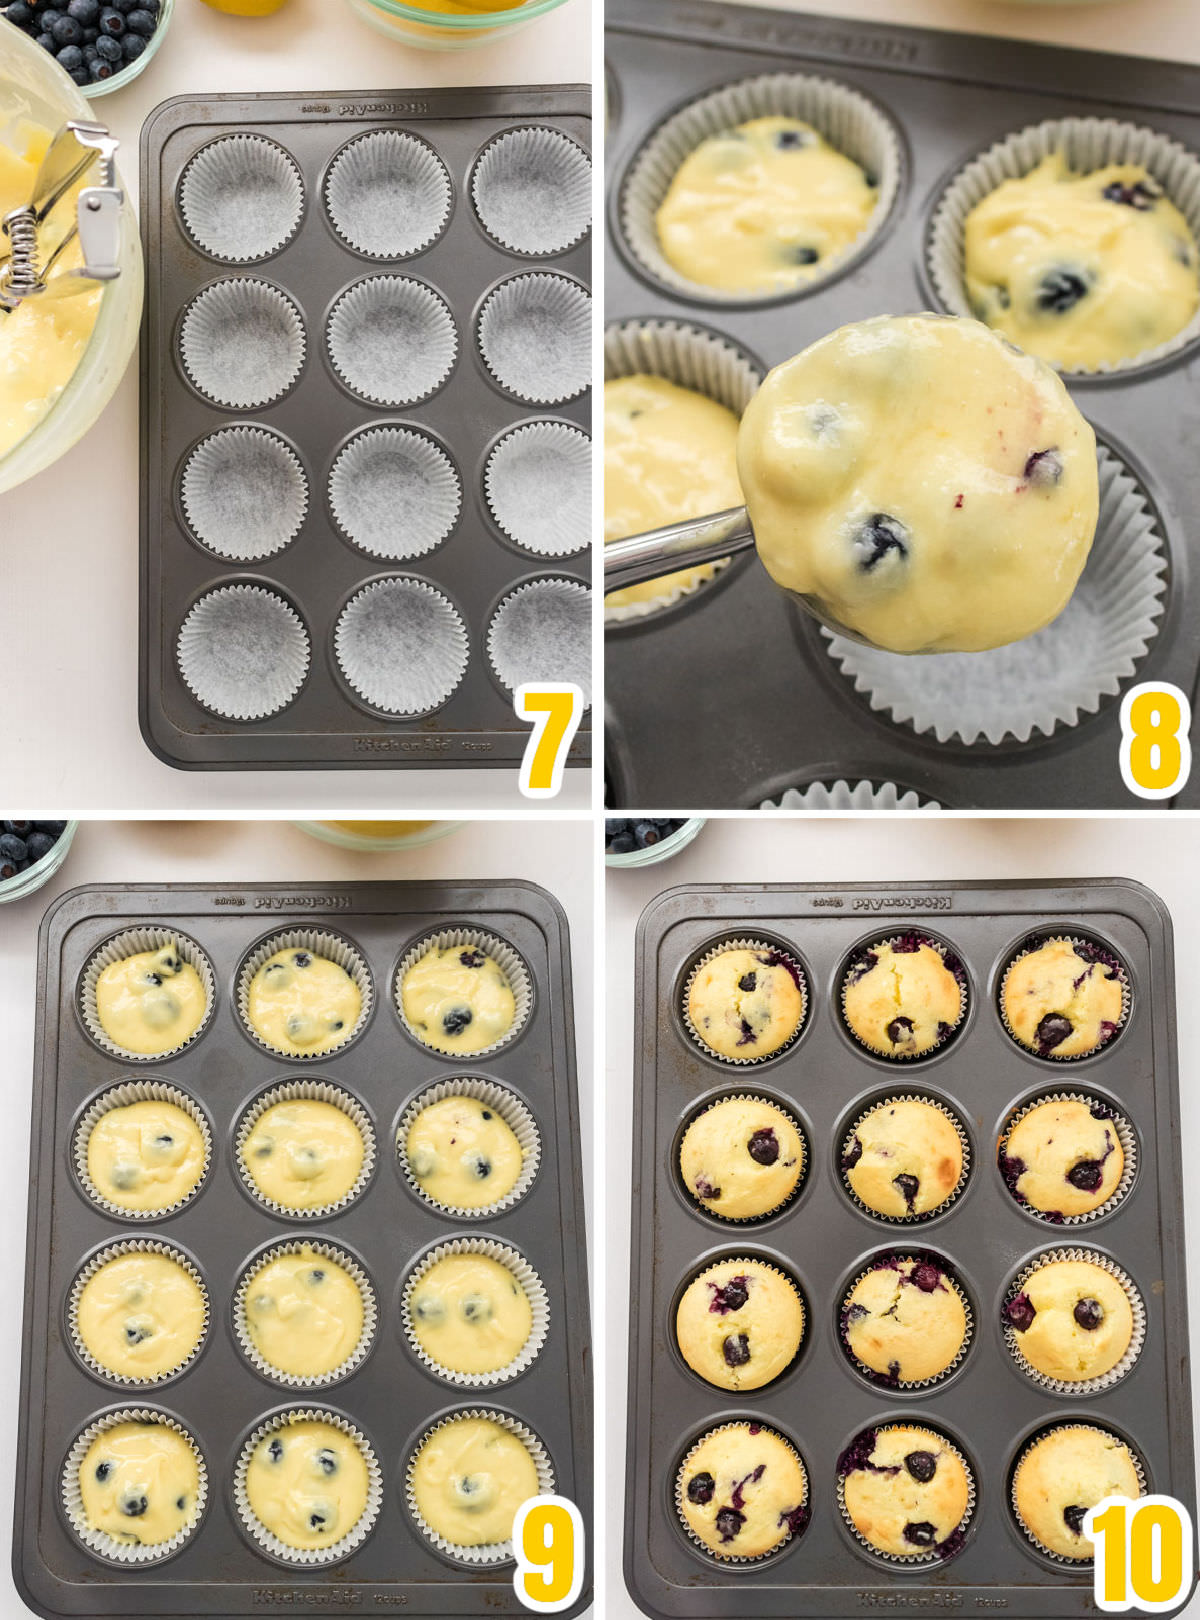 Collage image showing the steps for baking the Lemon Blueberry Cupcakes.